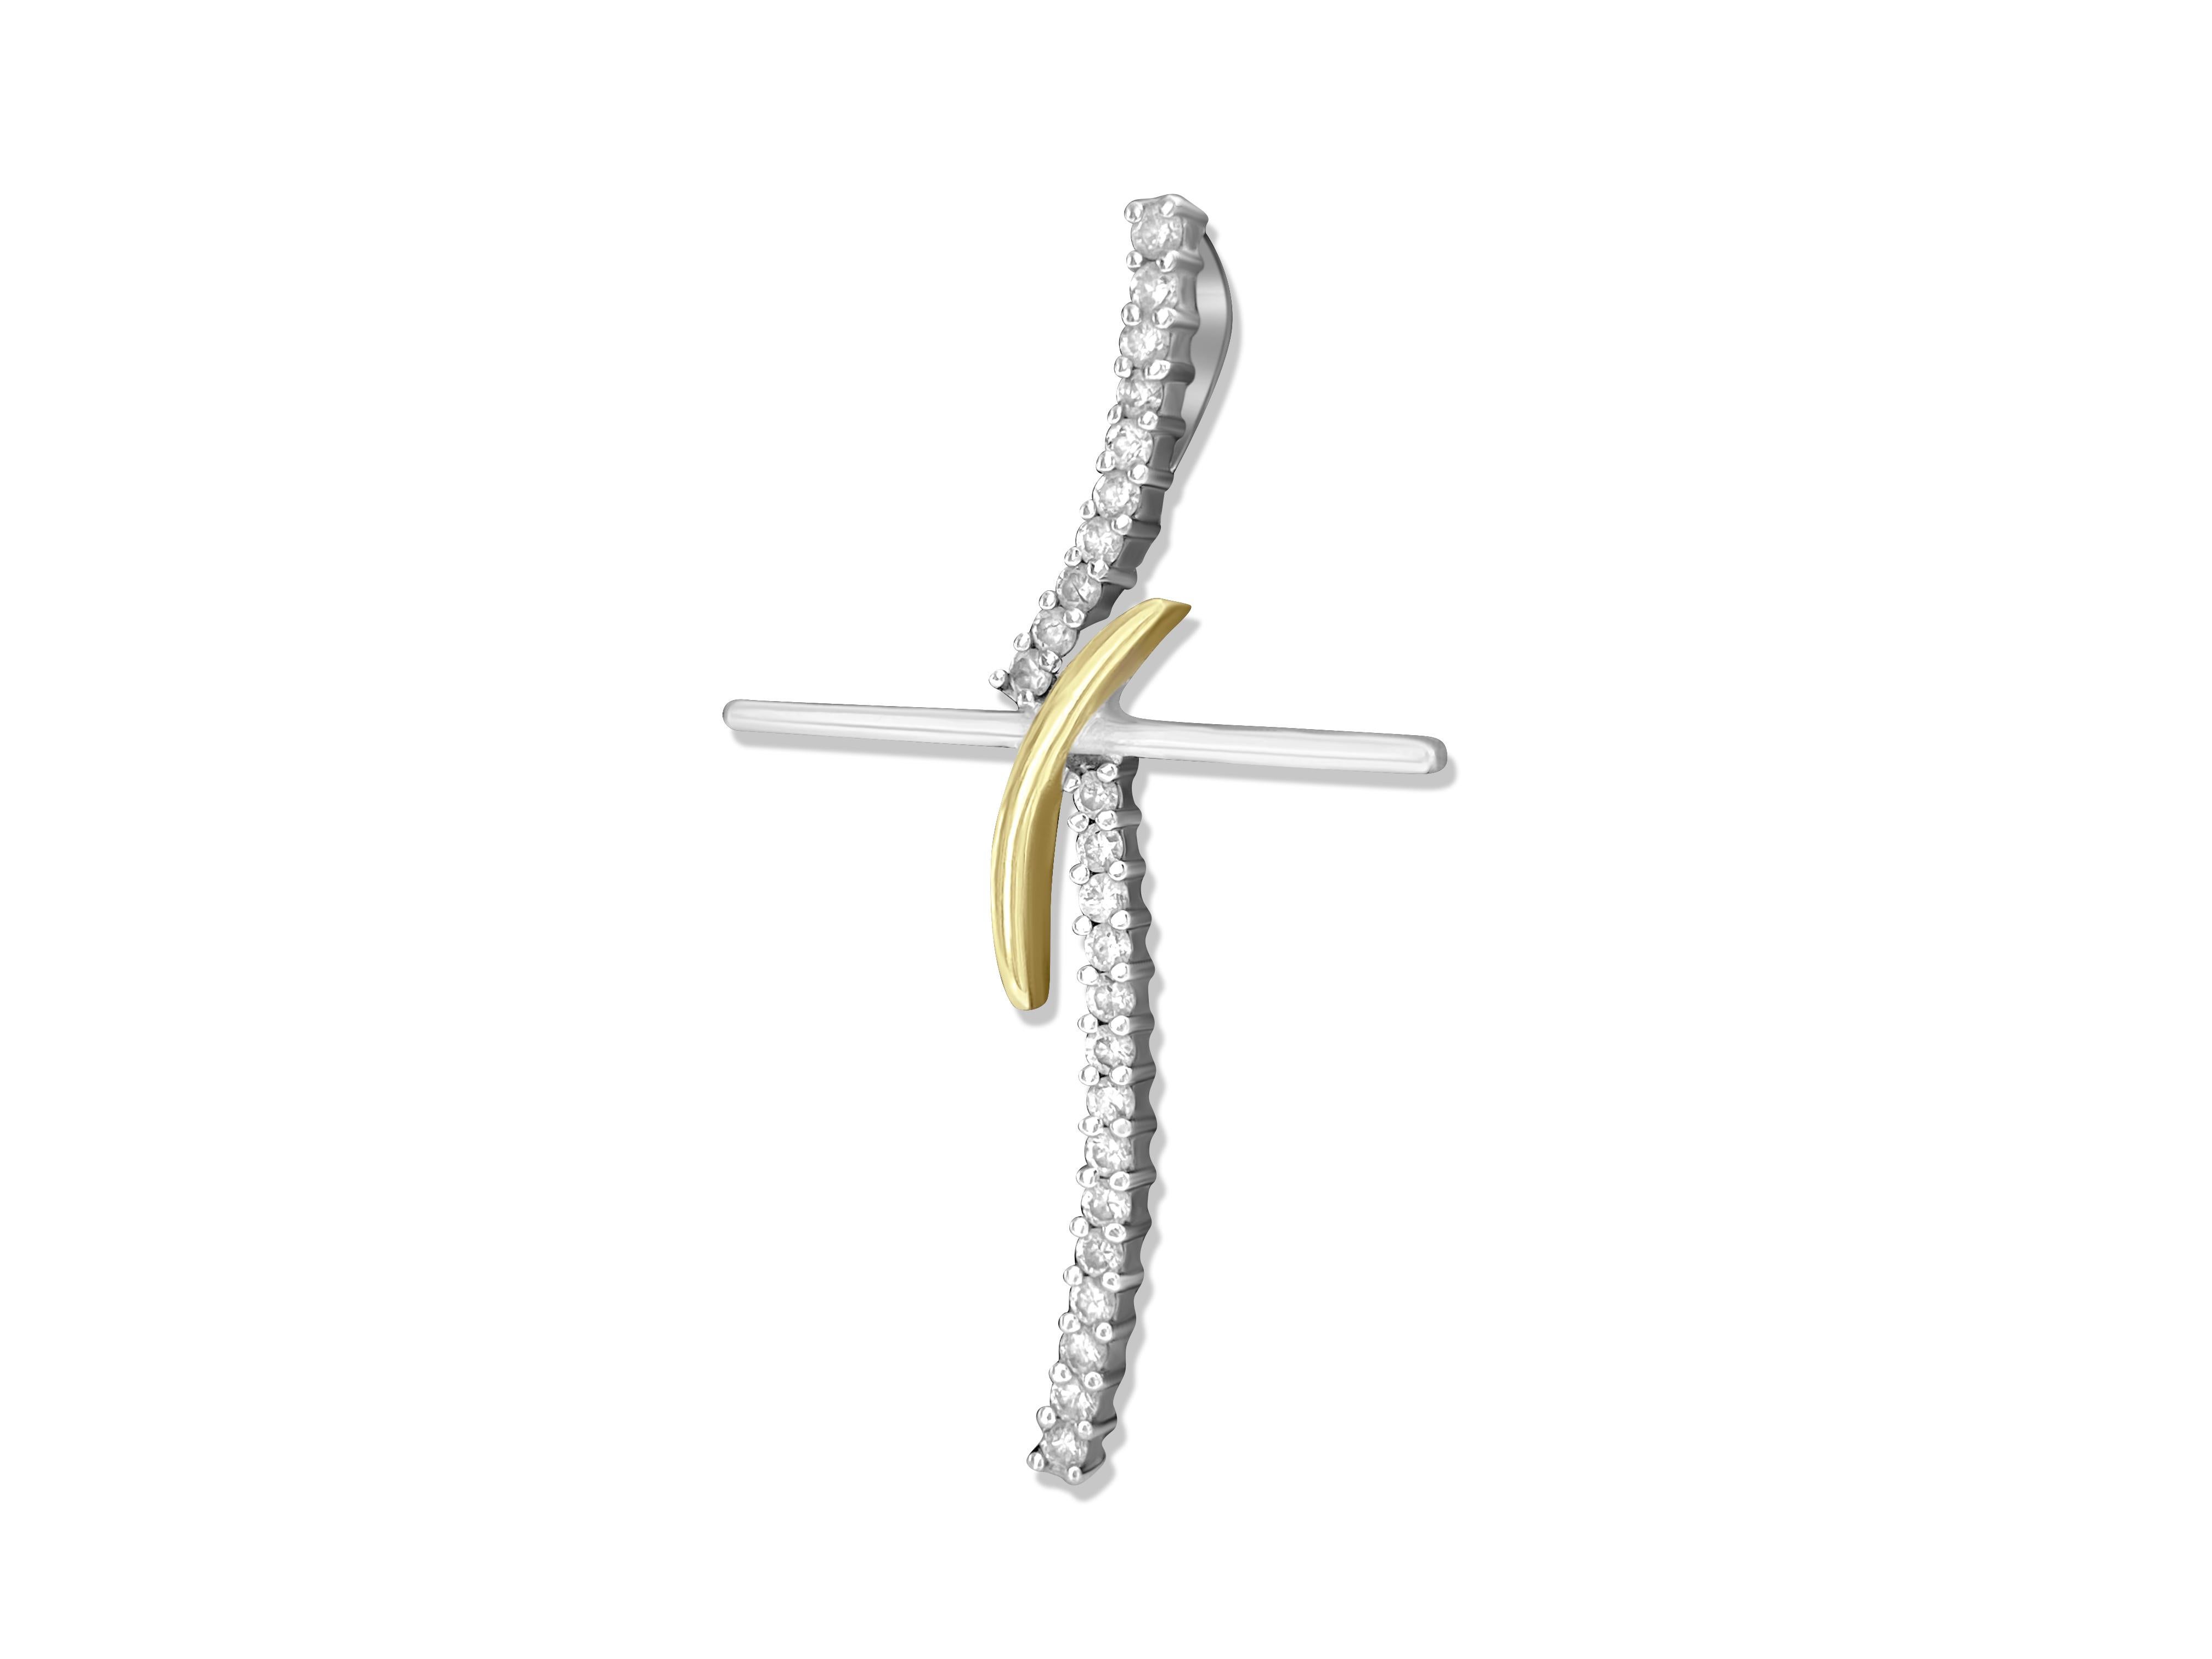 Metal: 18k white and yellow gold (two tone)

0.80cwt diamonds. VS clarity and G color.

Round brilliant cut diamonds. 100% natural earth mined diamonds.

Beautiful ladies diamond religious cross. 